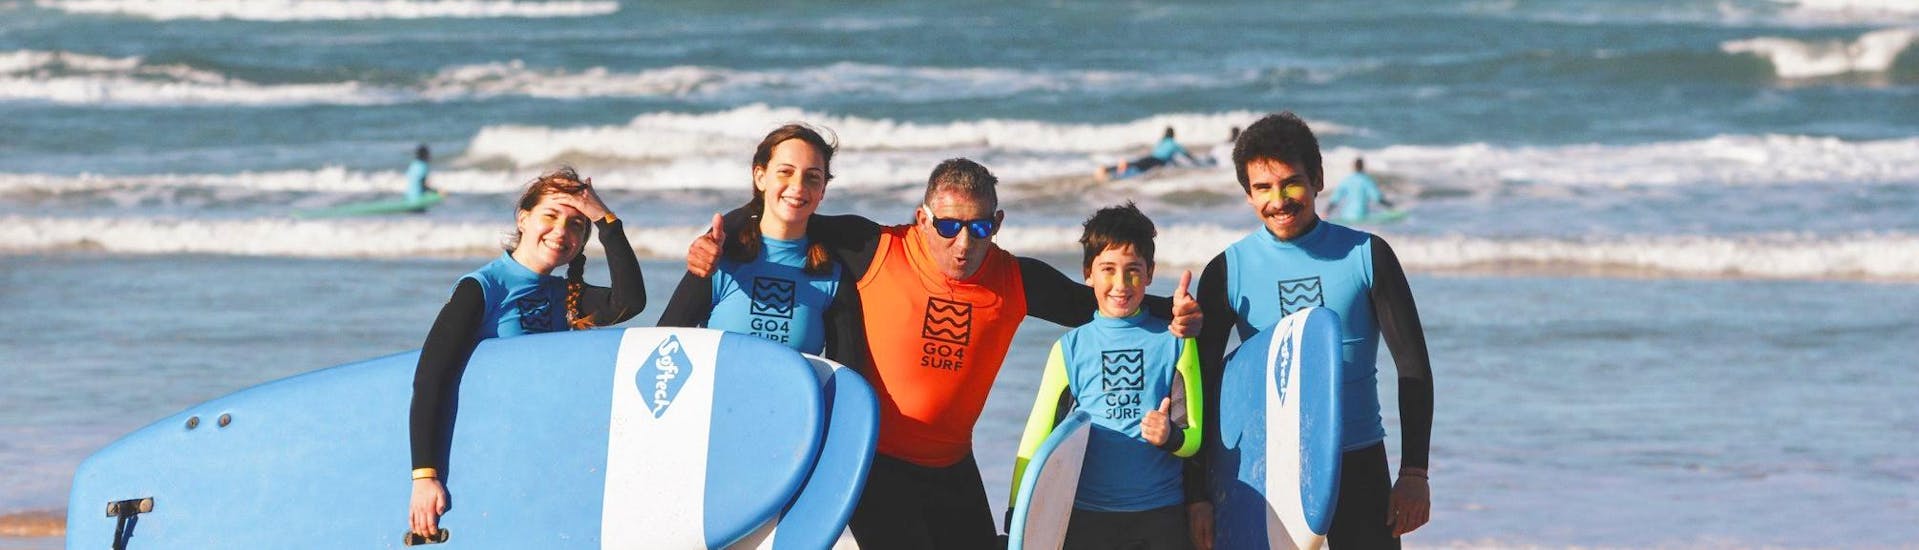 The participants of a surf lesson in Peniche are posing for a picture at the beach with their surf instructor from Go4Surf Peniche.